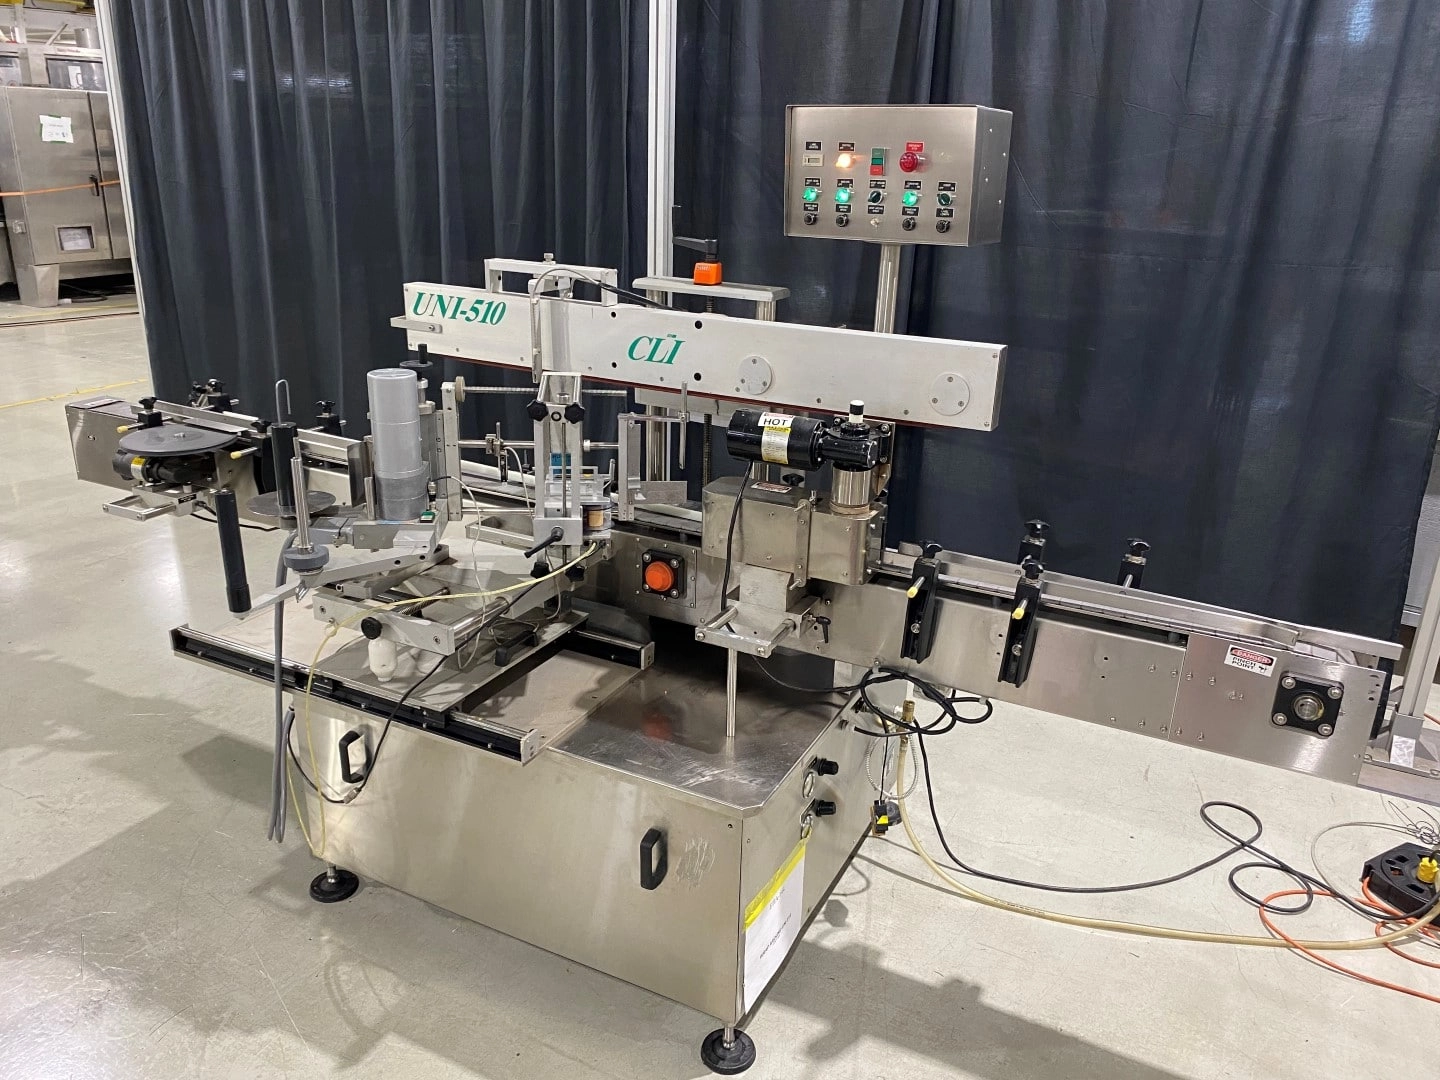 Used CLI single head wrap around labeler model UNI-510 for round bottle or single panel labeling